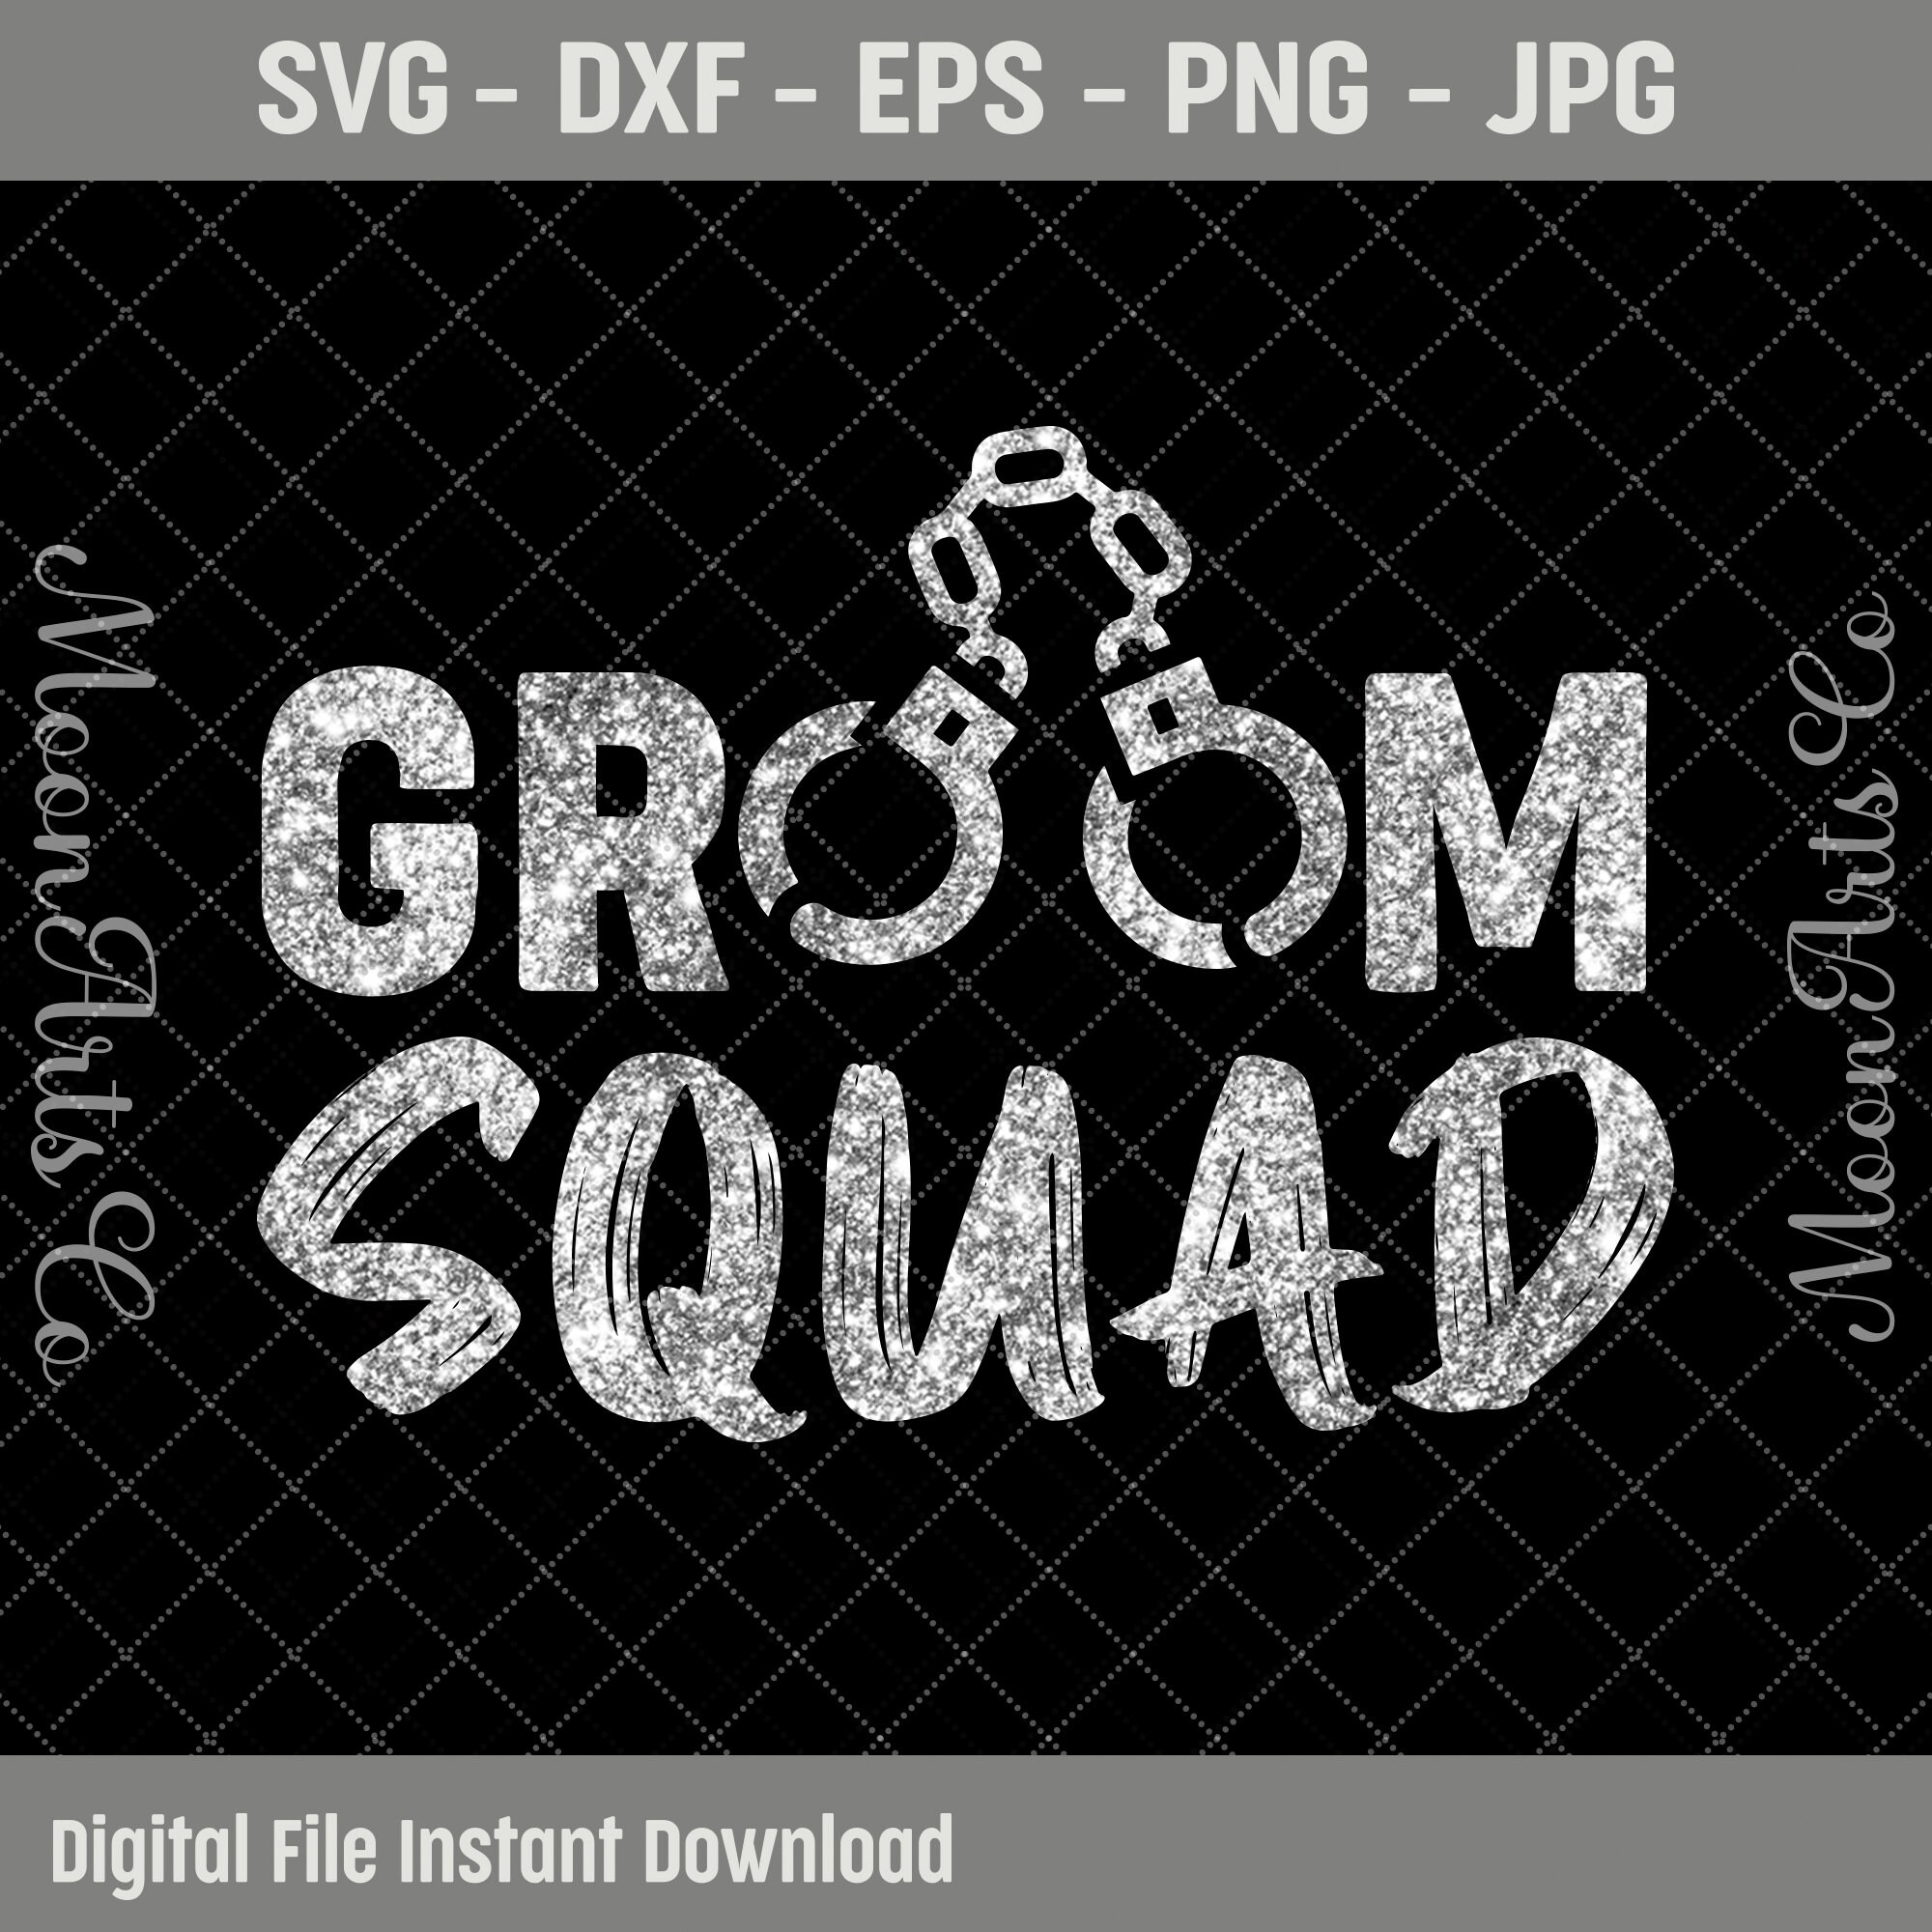 Bachelor Party Svg I Do Crew Svg Groom Party Svg Groom Squad Svg Groom Crew Svg Groom Cut File Groom Svg Groom Crew SVG